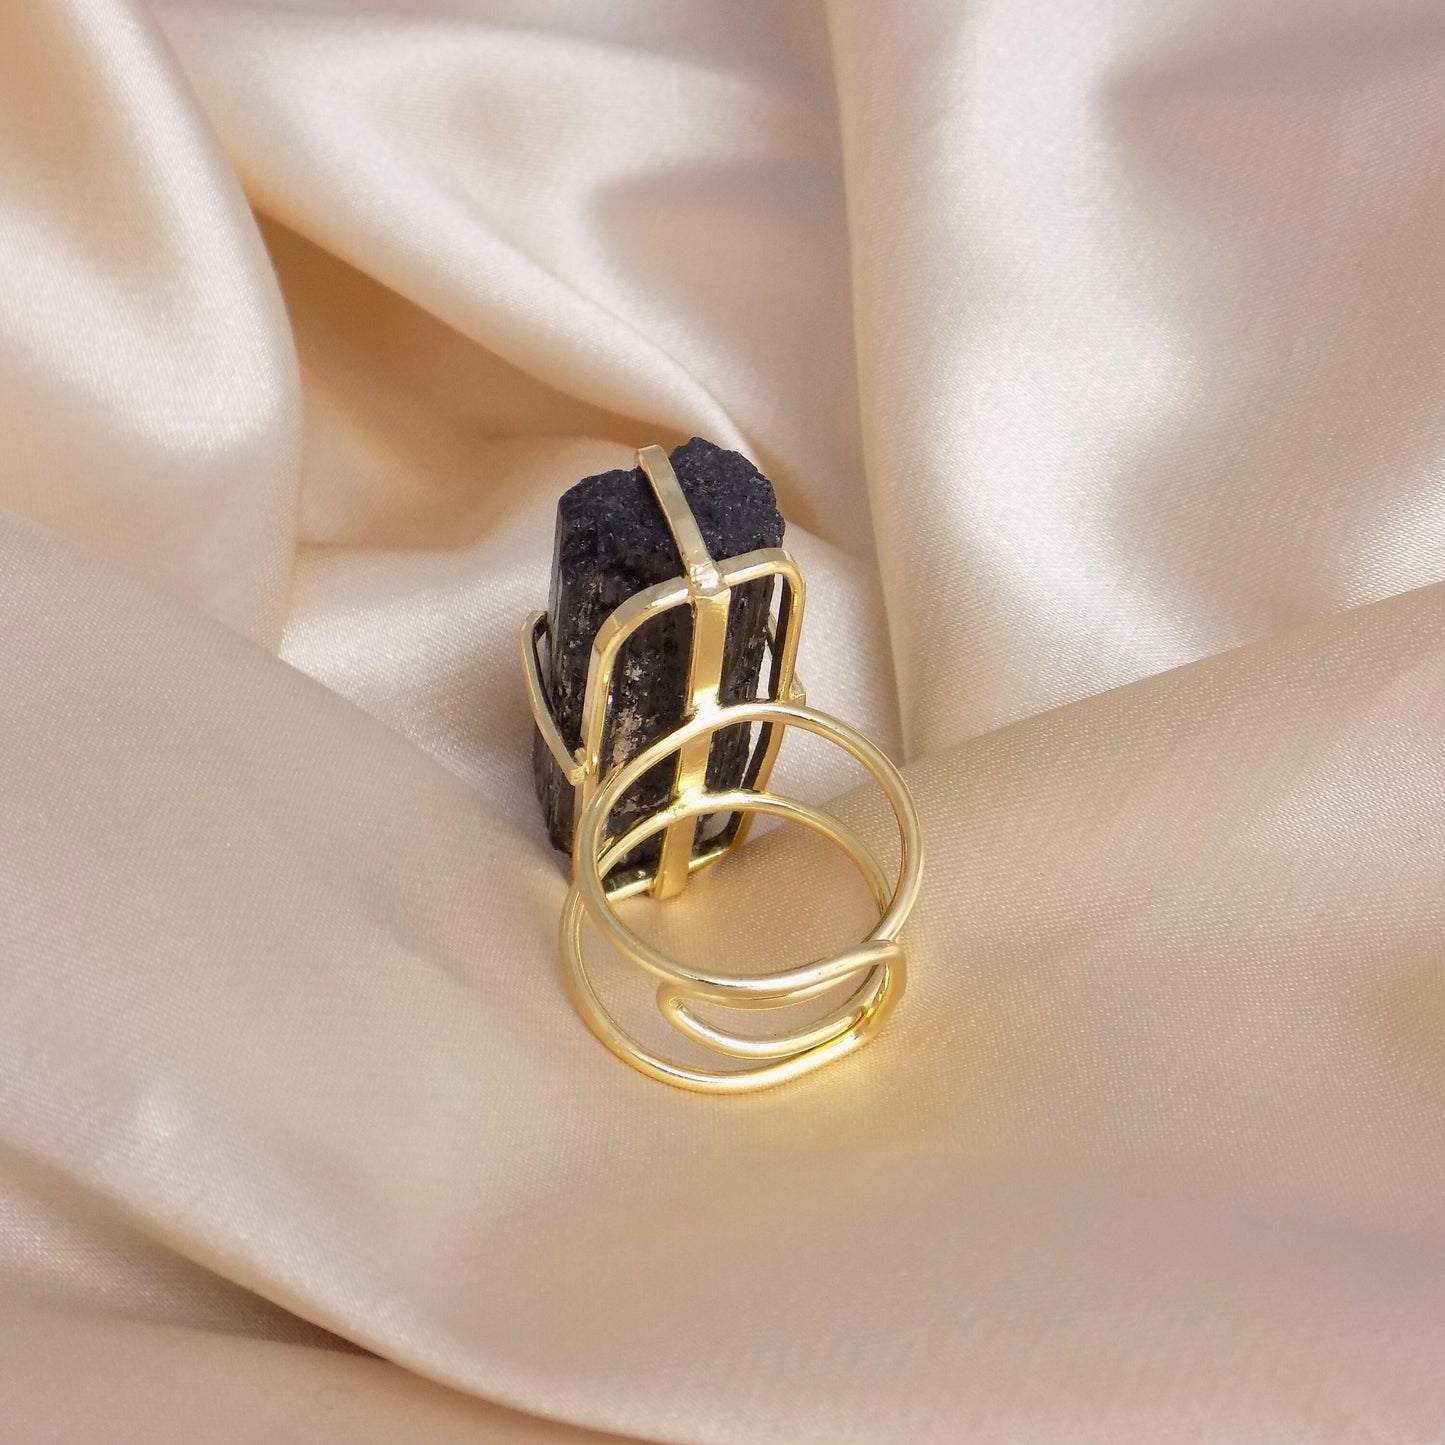 Raw Black Tourmaline Ring Gold Adjustable, Large Black Stone Statement Ring, Mothers Gifts For Her, G15-87